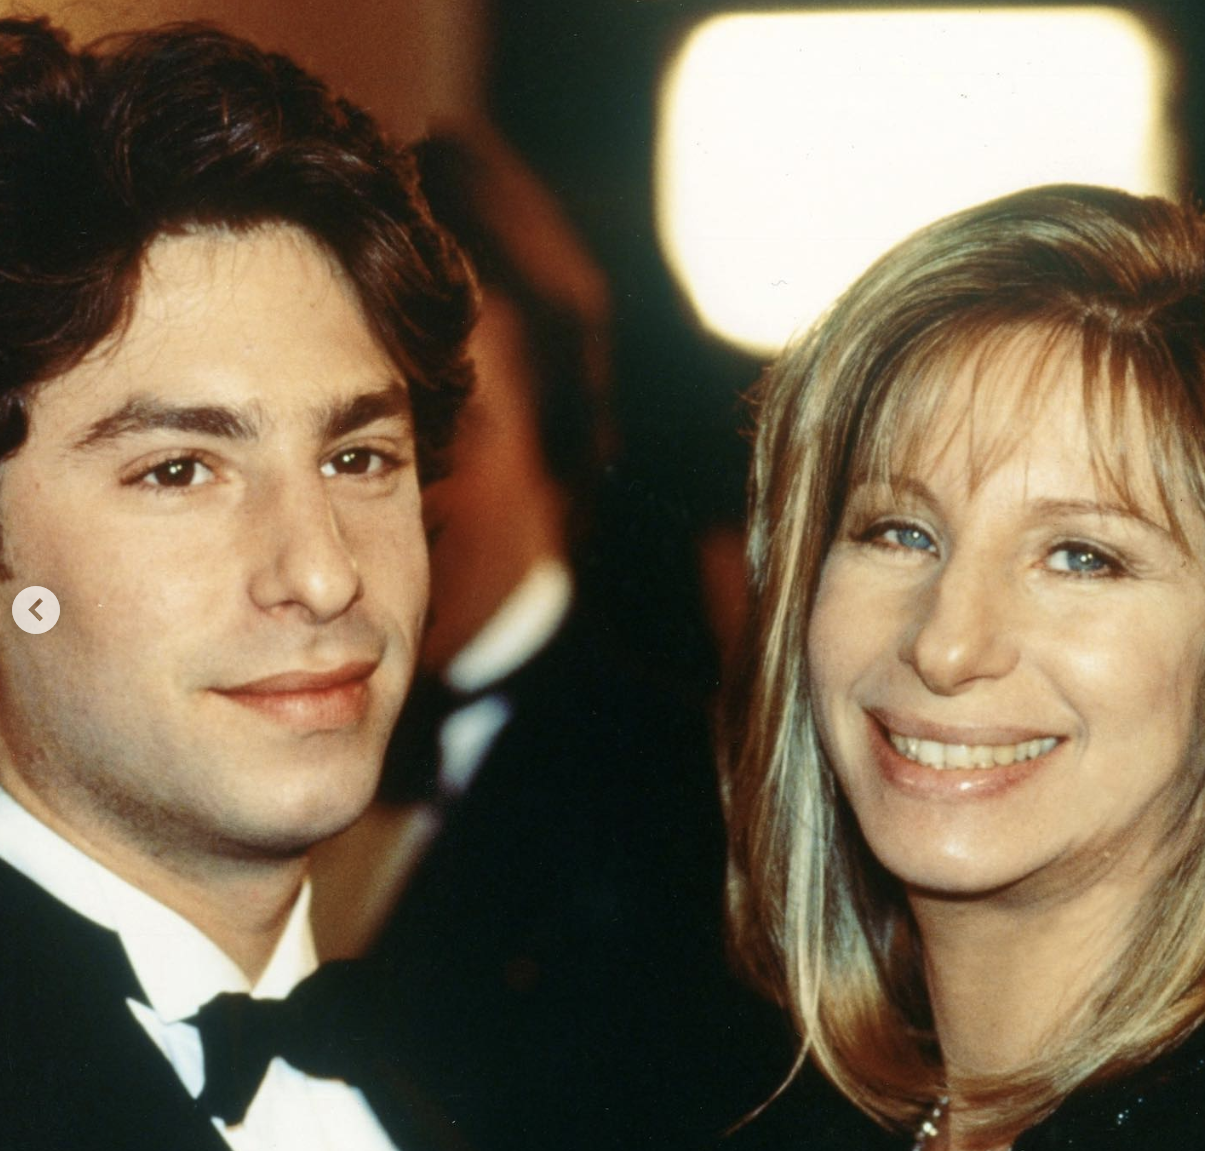 Barbra Streisand and Jason Gould as seen in an Instagram post dated May 9, 2021 | Source: Instagram.com/jasongouldmusic/